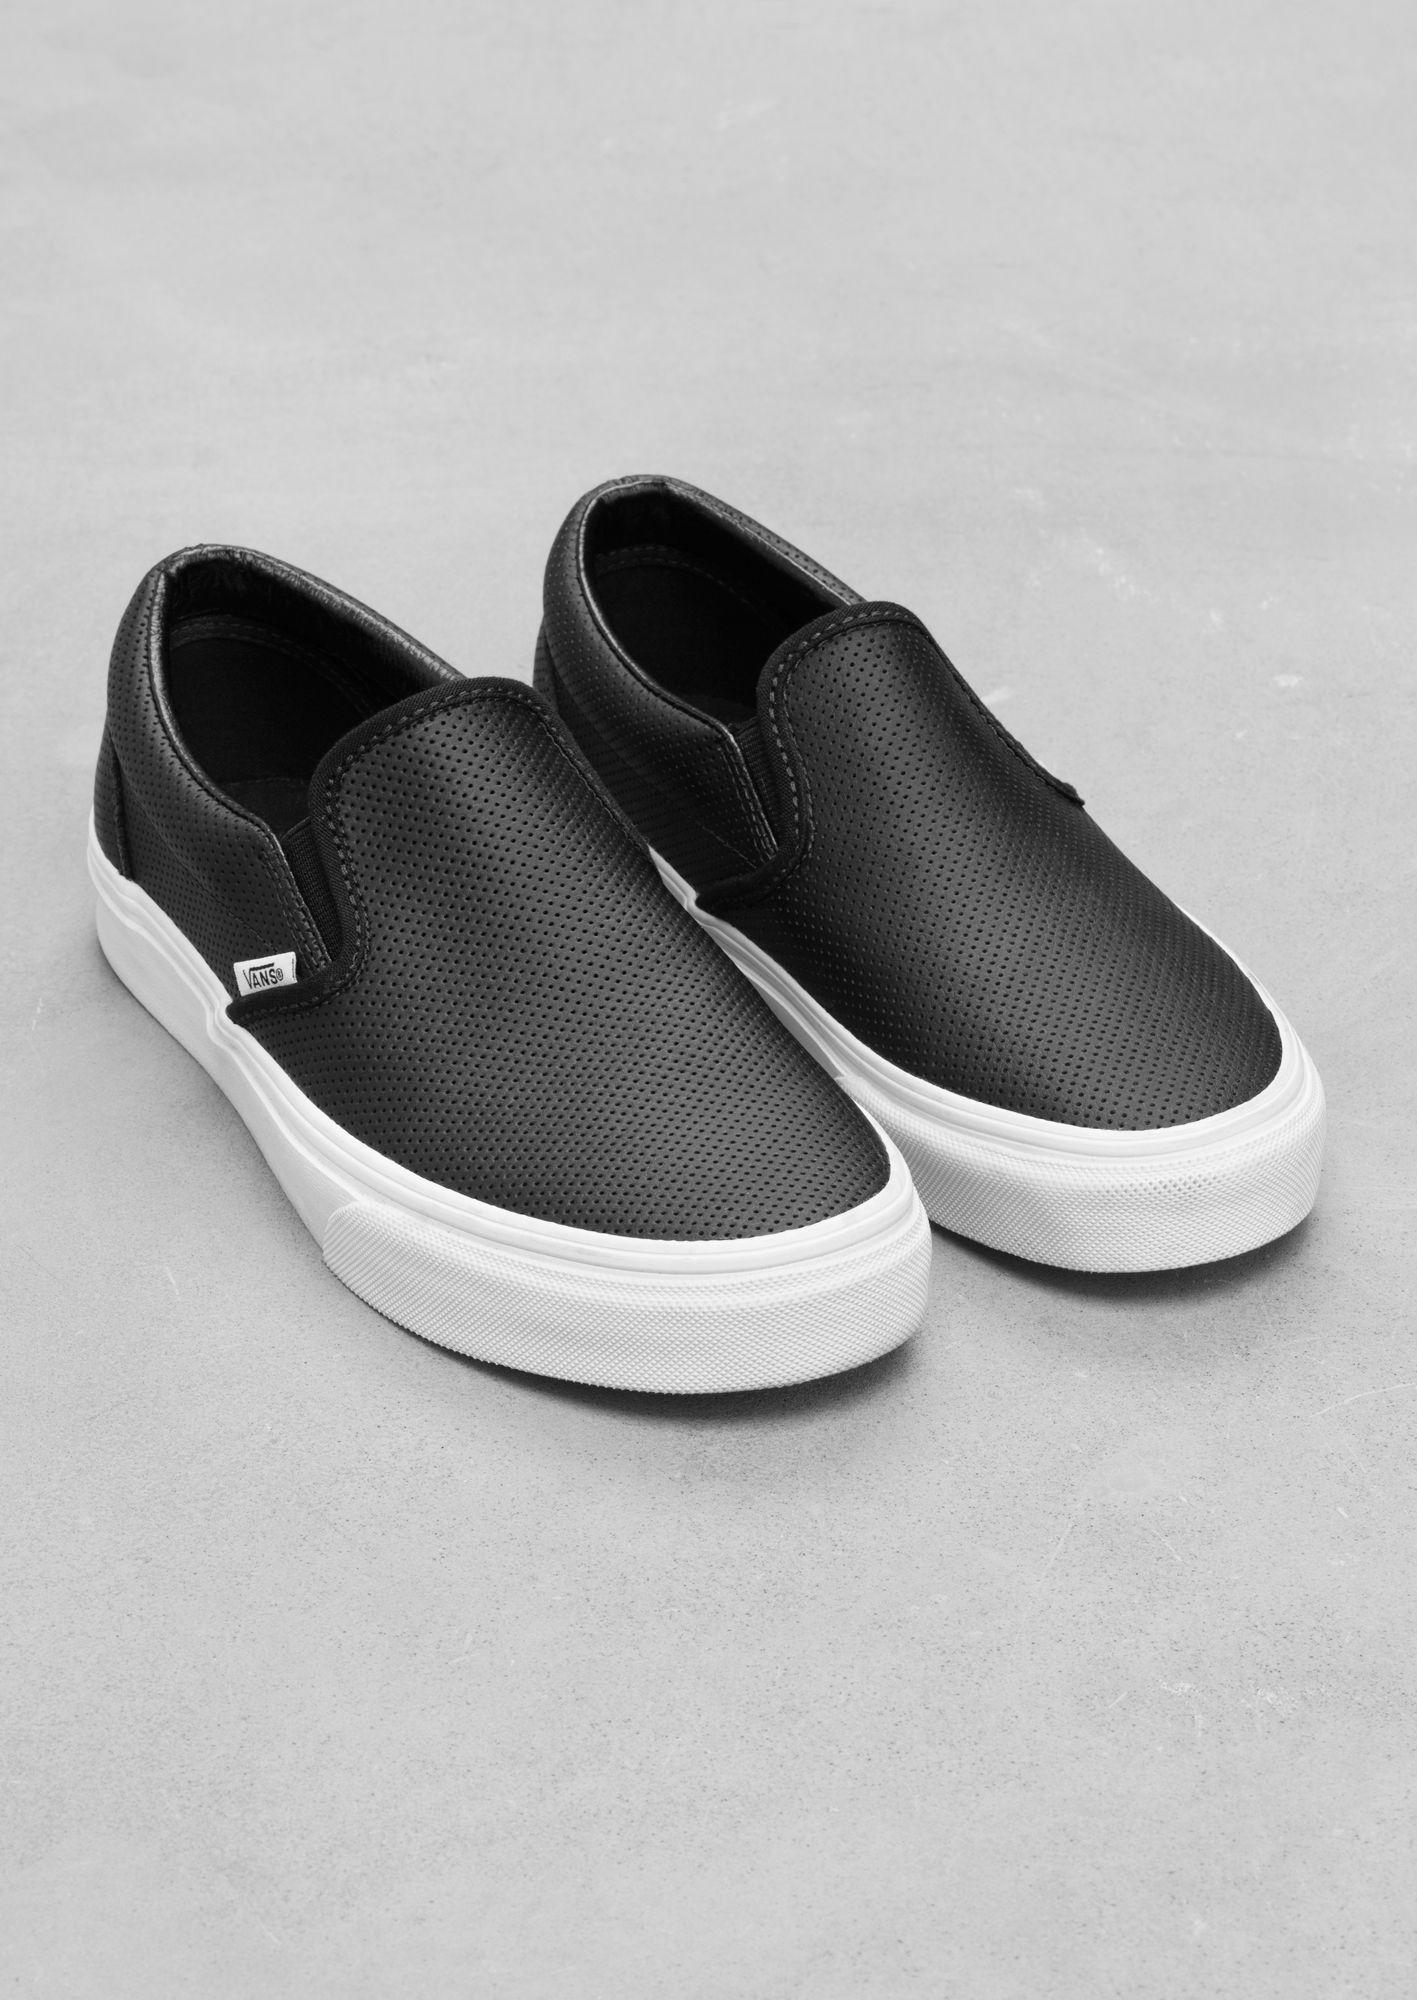 Leather Vans Logo - Perf Leather Slip On. Xmas. Shoes, Sneakers, Slip On